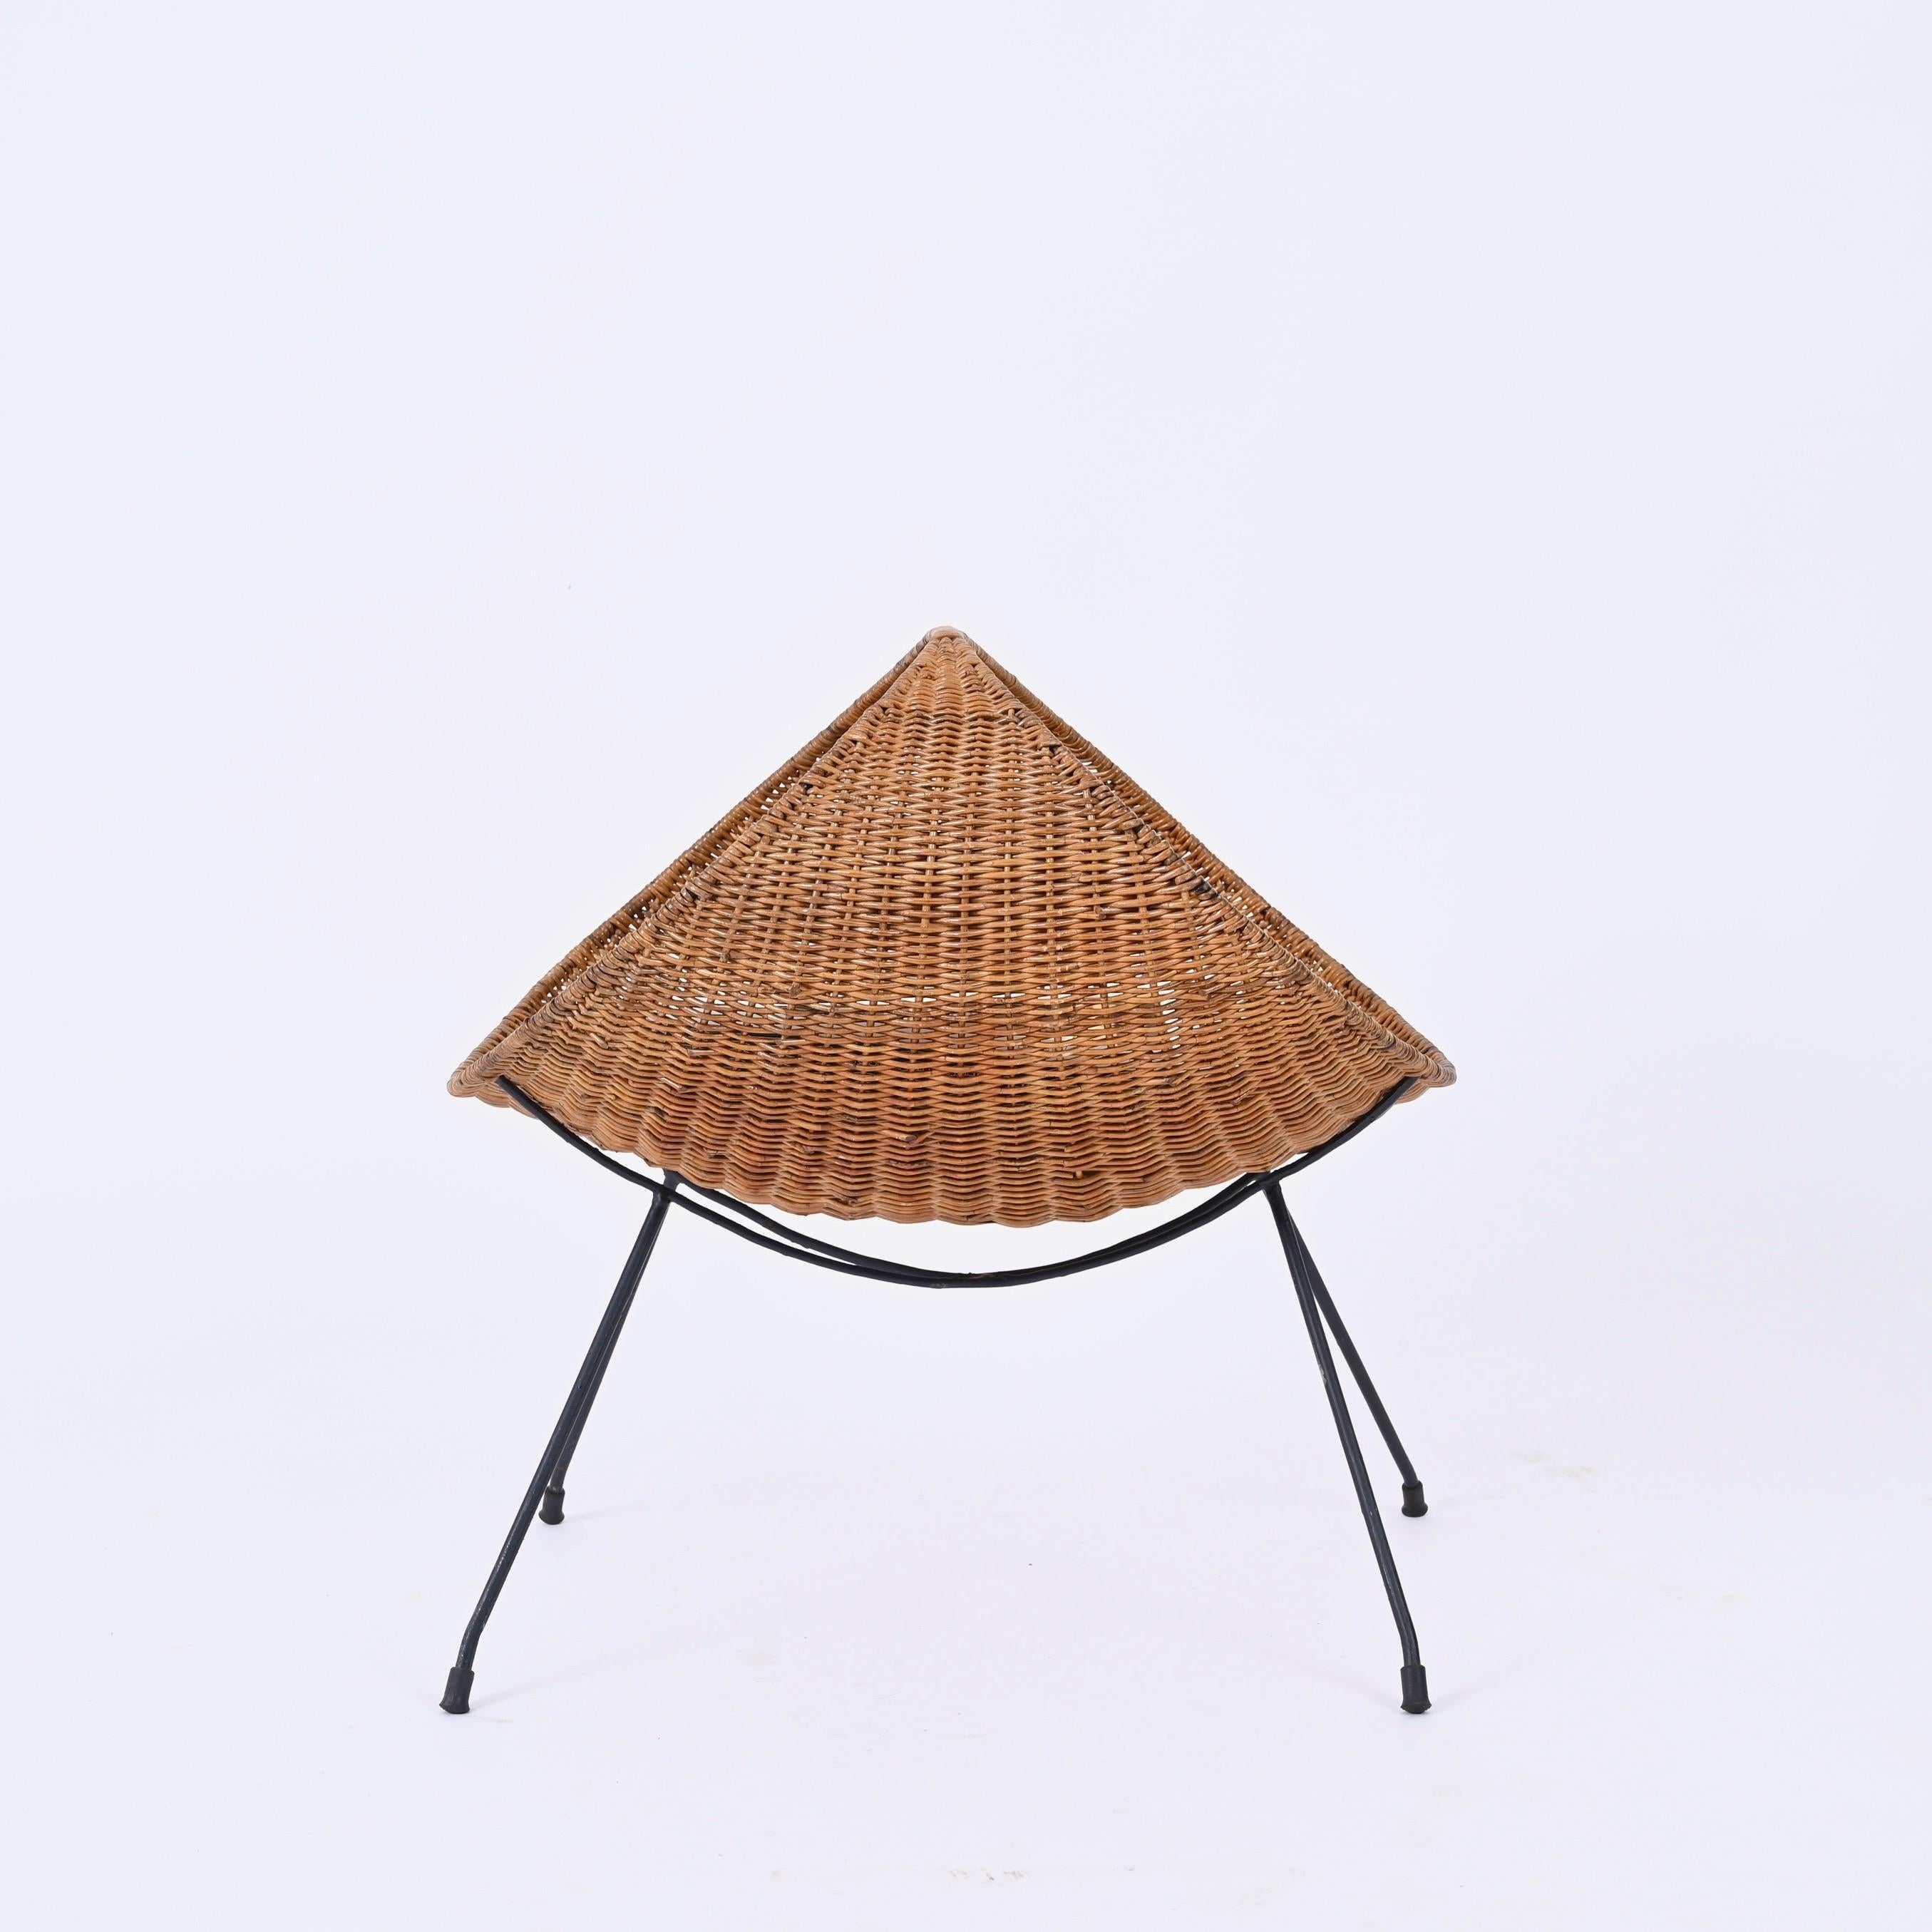 Italian Campo & Graffi Magazine Rack in Wicker and Black Enameled Iron, Italy 1950s For Sale